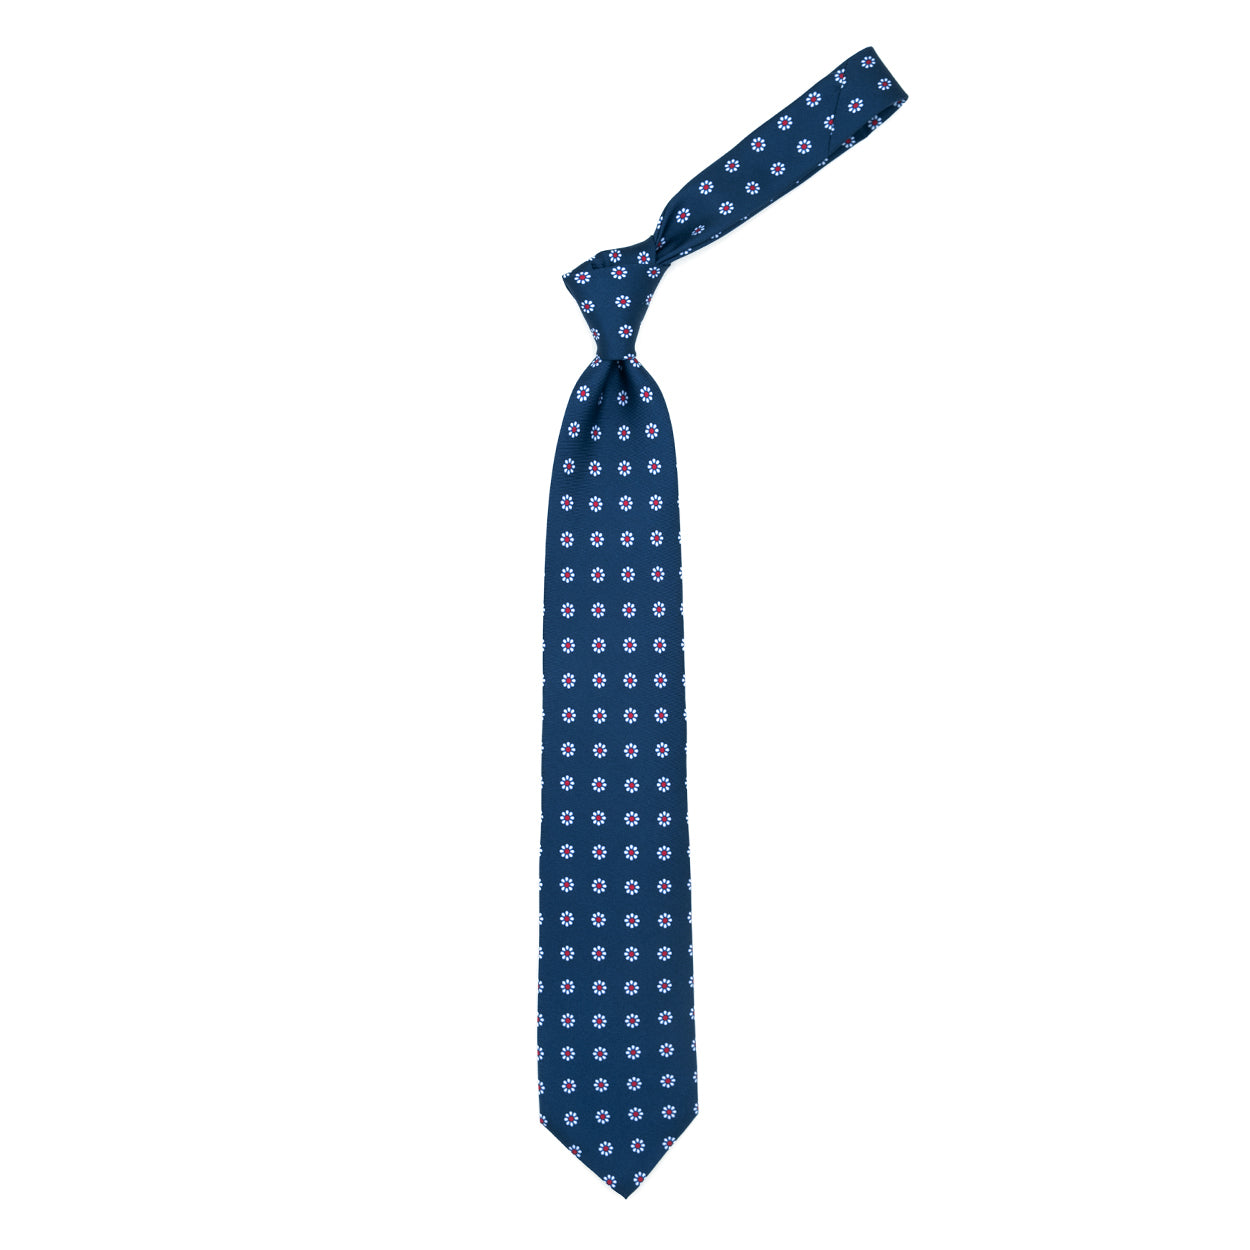 Blue tie with white flowers and red dots